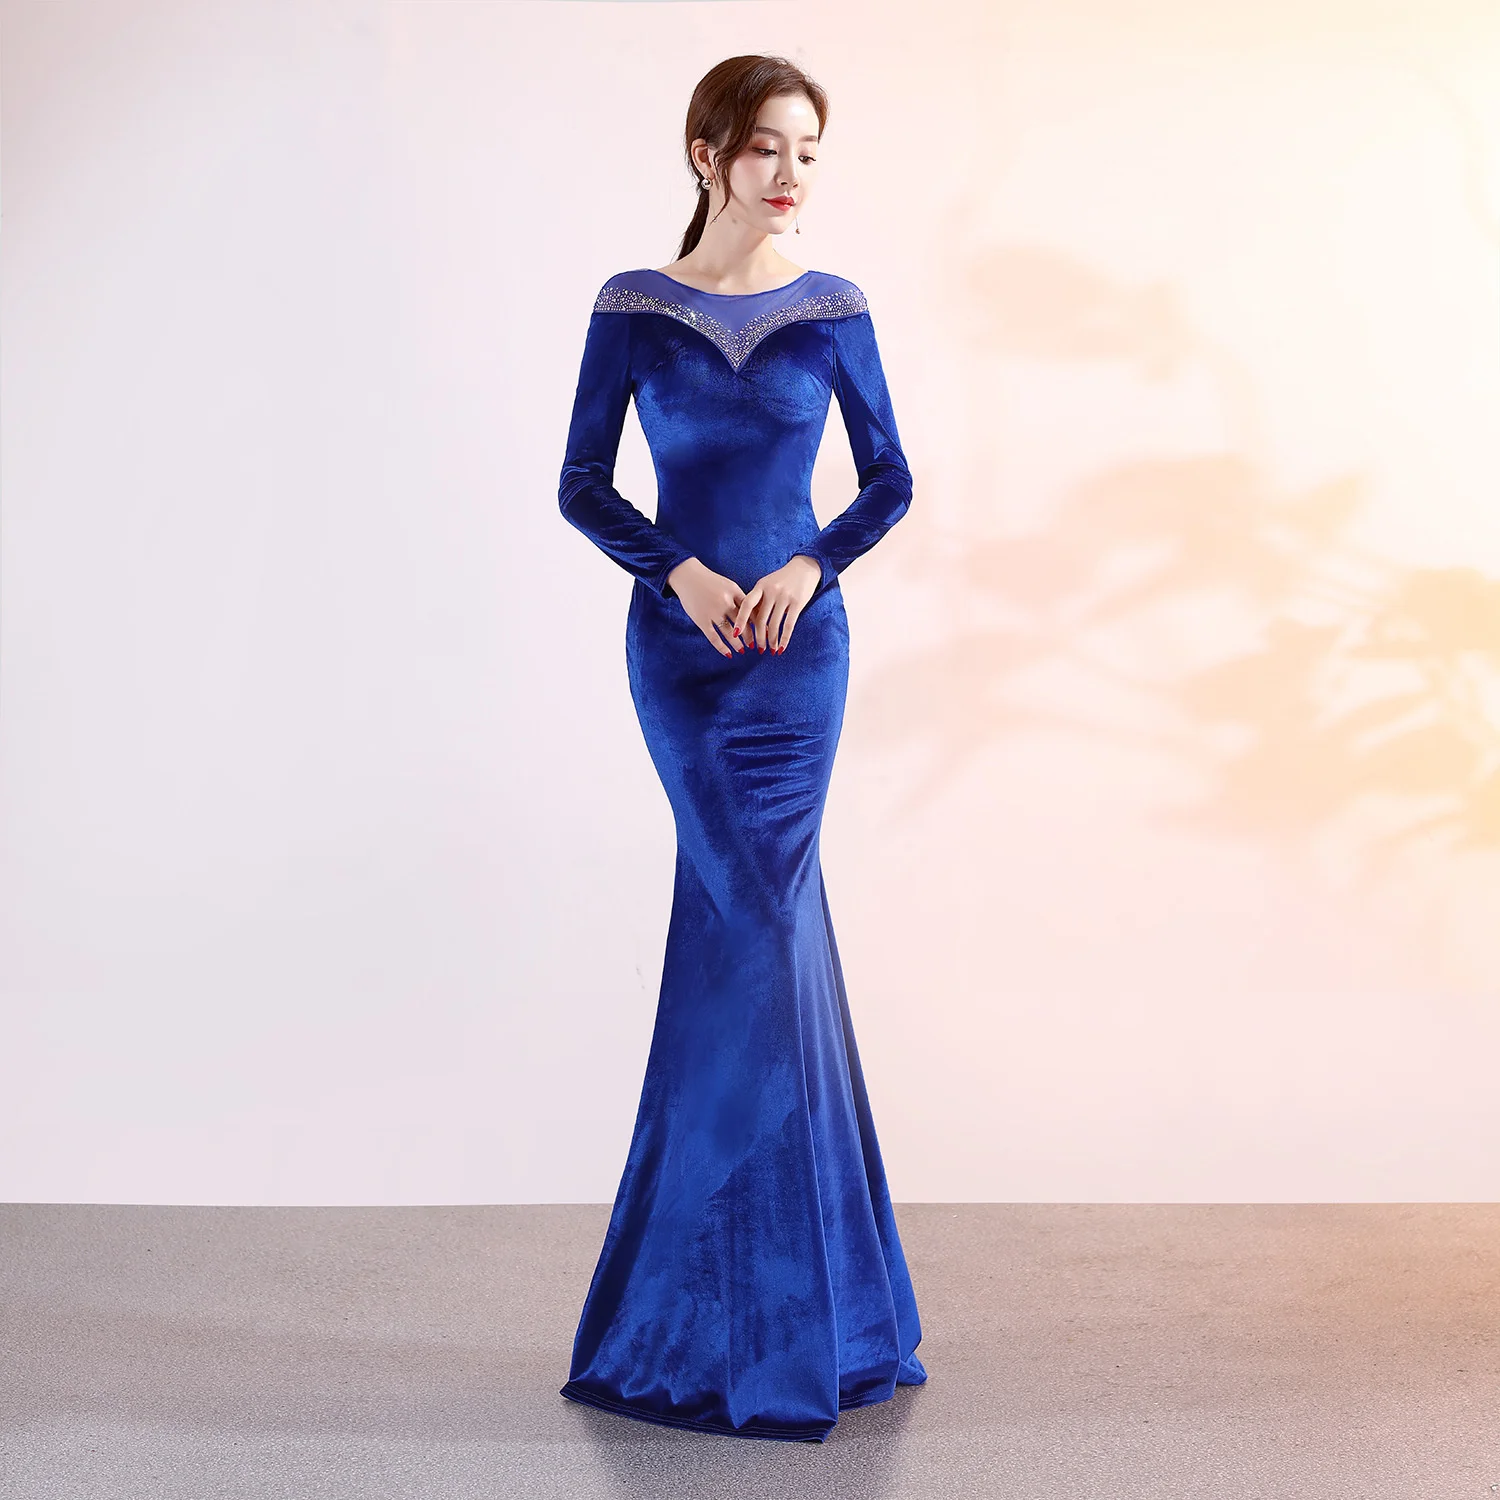 

Velvet Banquet Sparkle Sexy Mermaid Evening Gowns Dresses Wedding Dress Tulle Elegant Long Sequined O-Neck Sleeve Fishtail Party